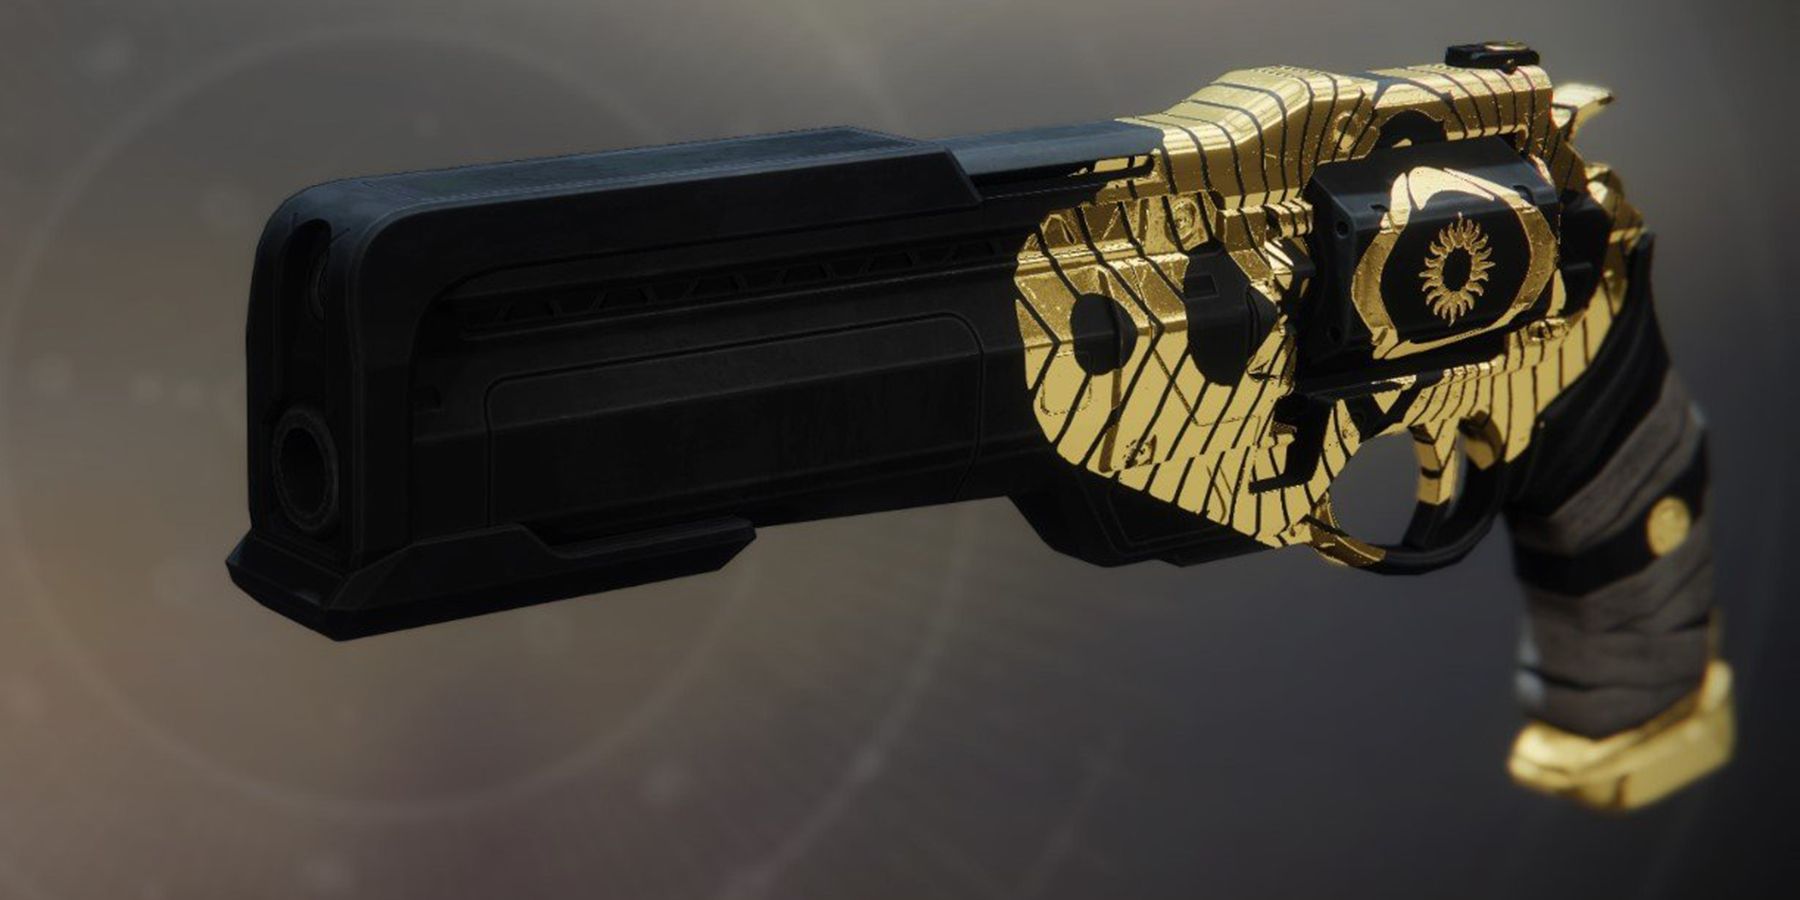 Destiny 2 Ace of Spades All In Ornament